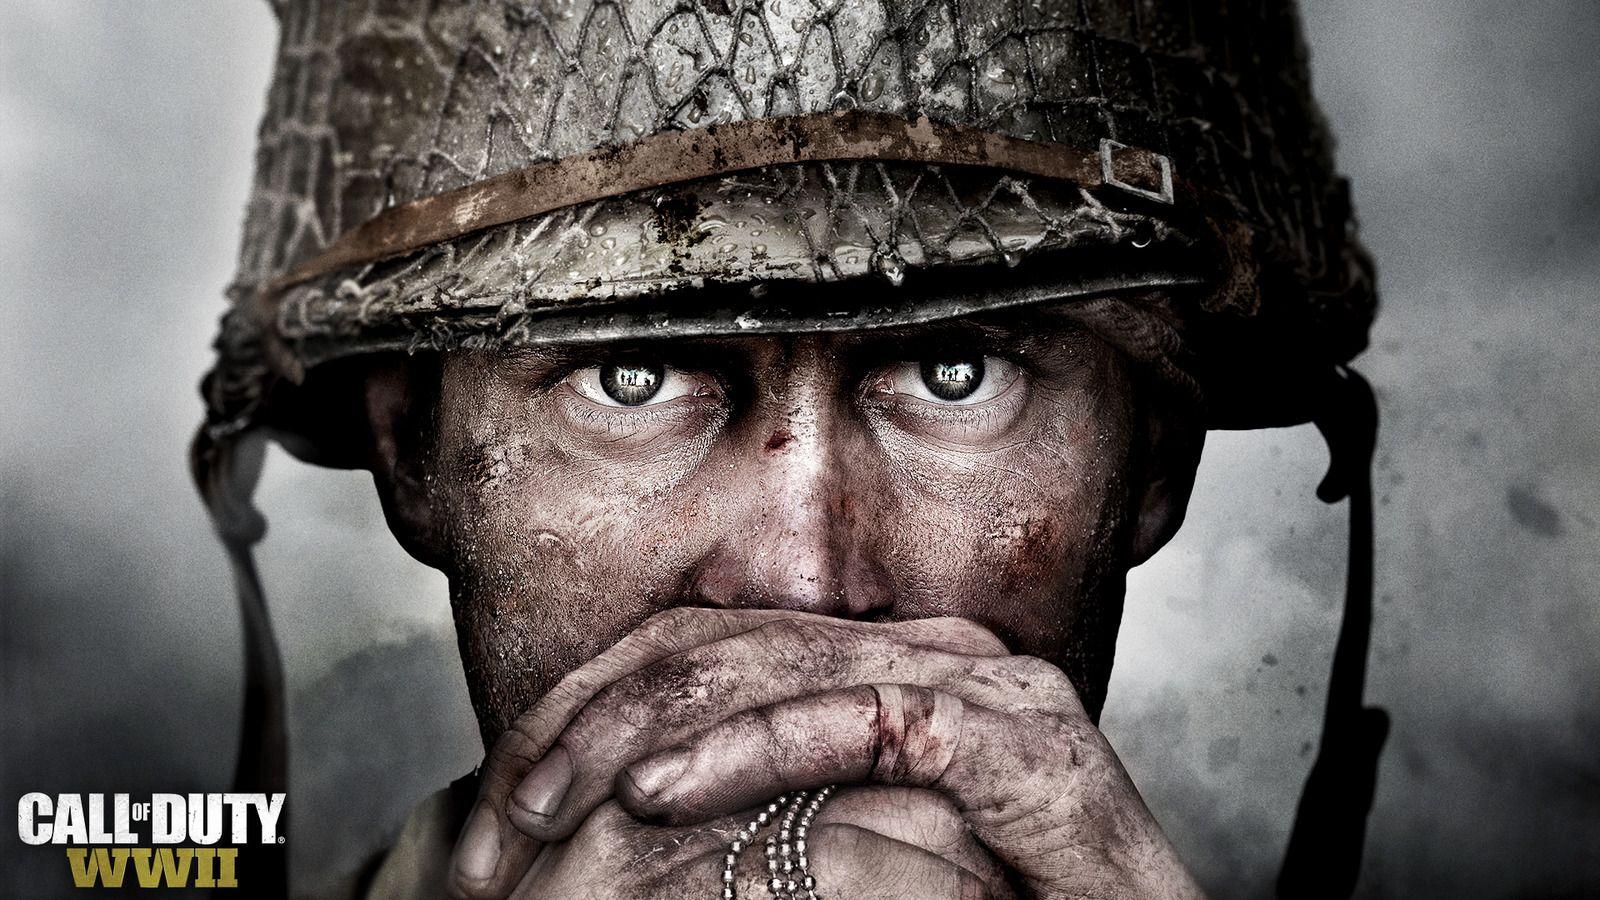 The rumors are true: 'Call of Duty' is going back to World War II